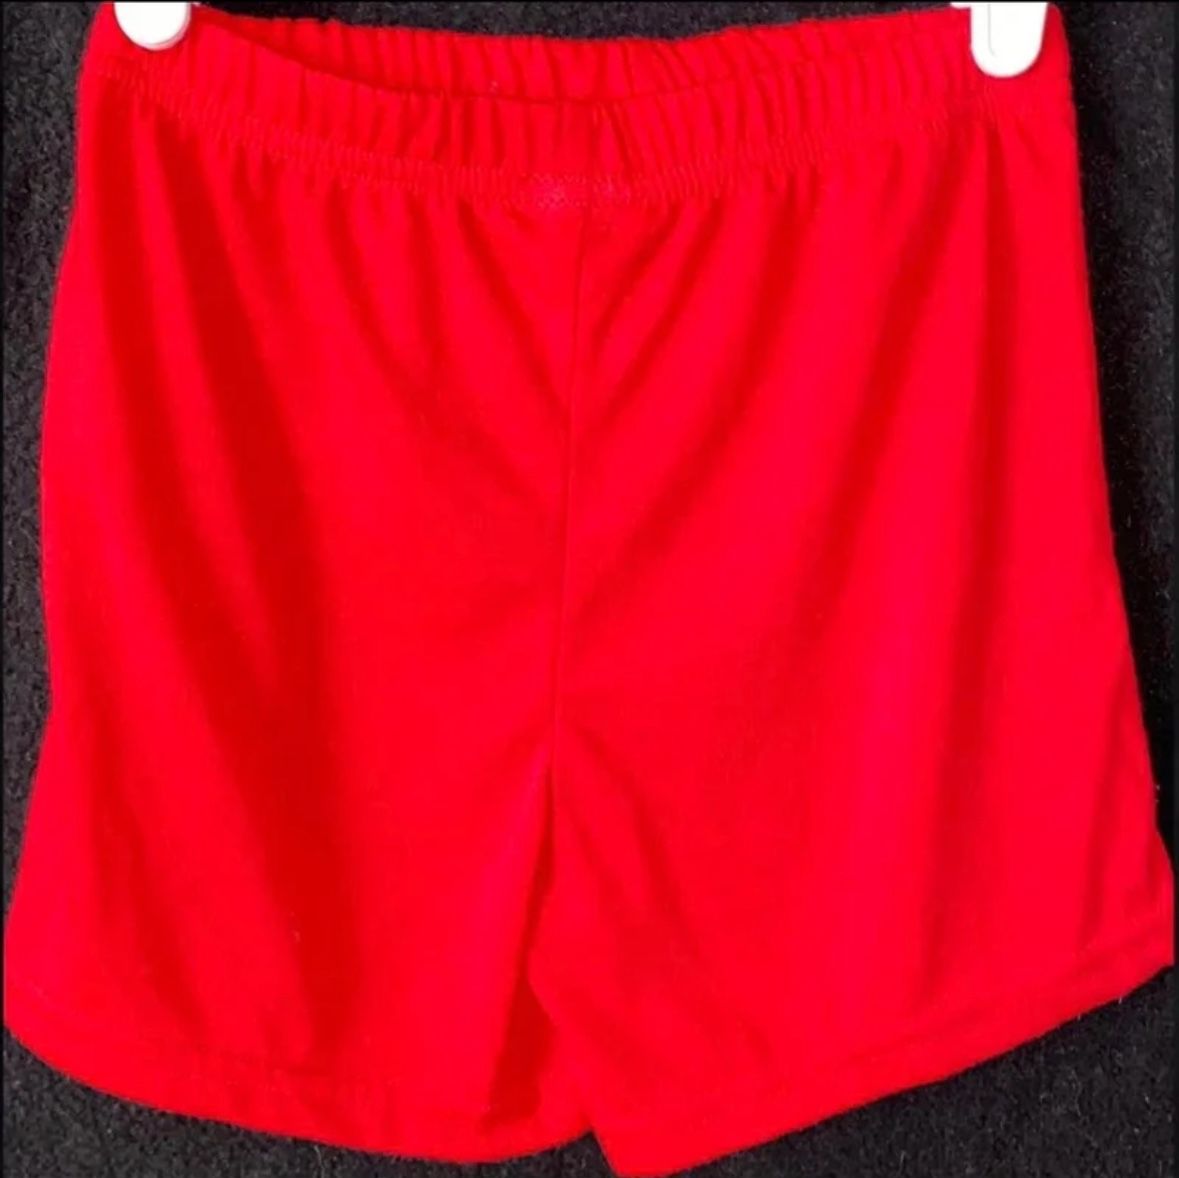 New Toddler Boys Size 4T Red Knit Shorts